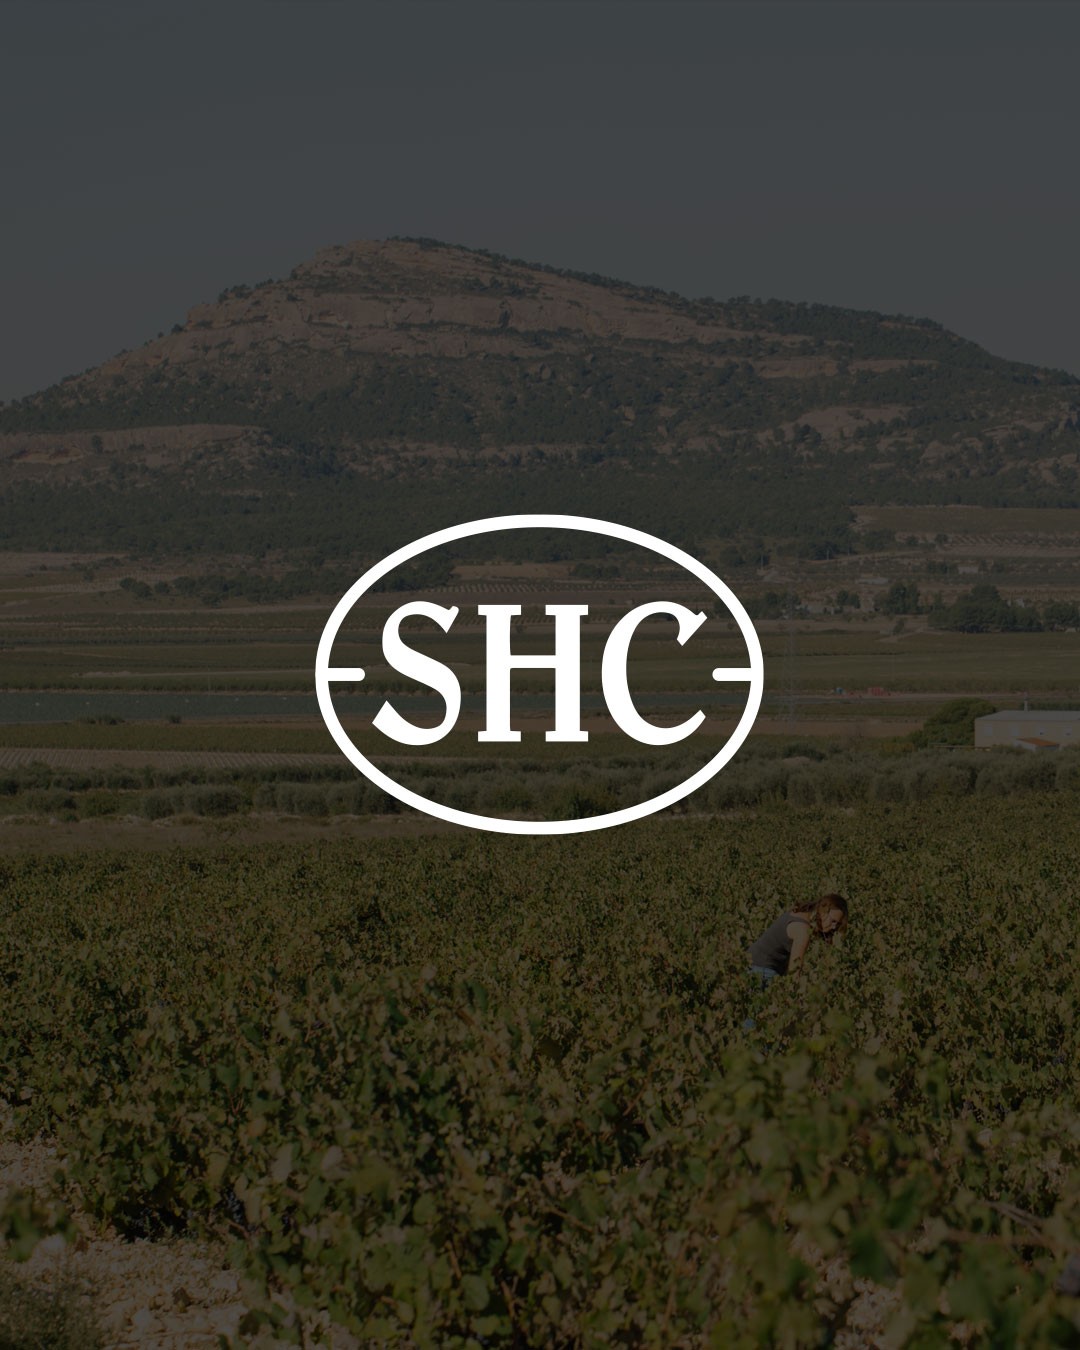 All our wines bear the SHC Seal for guaranteed quality